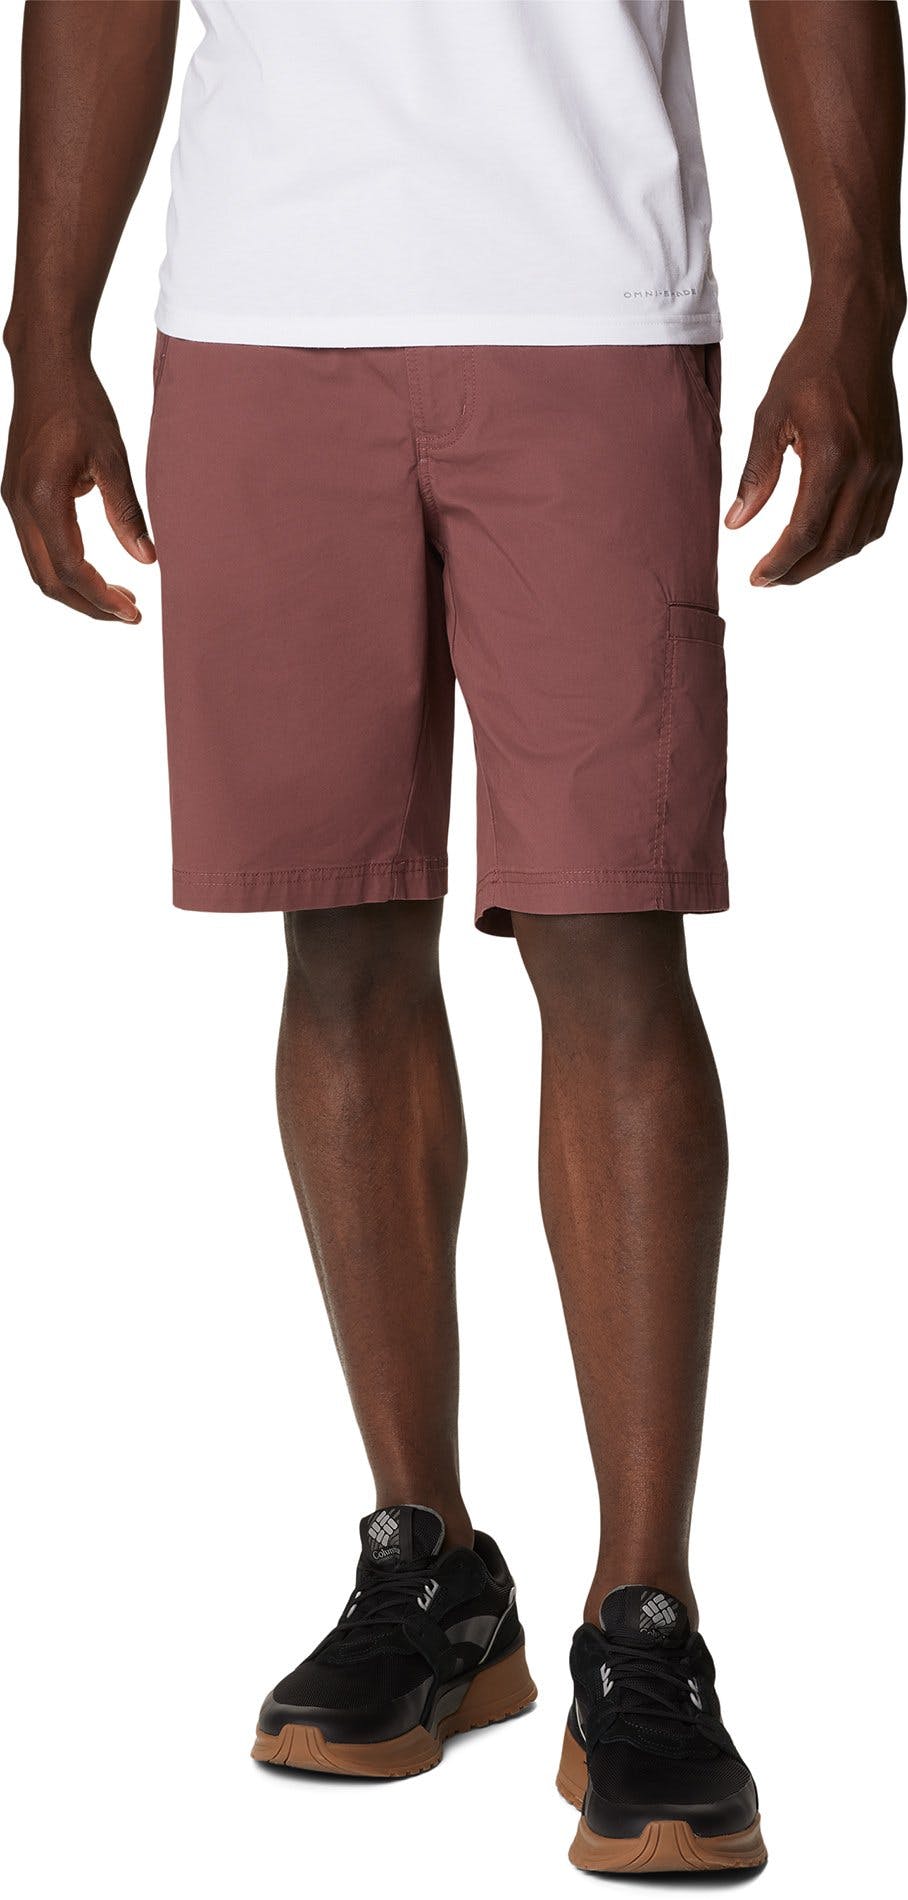 Product image for Pine Canyon Cargo Short - Men's